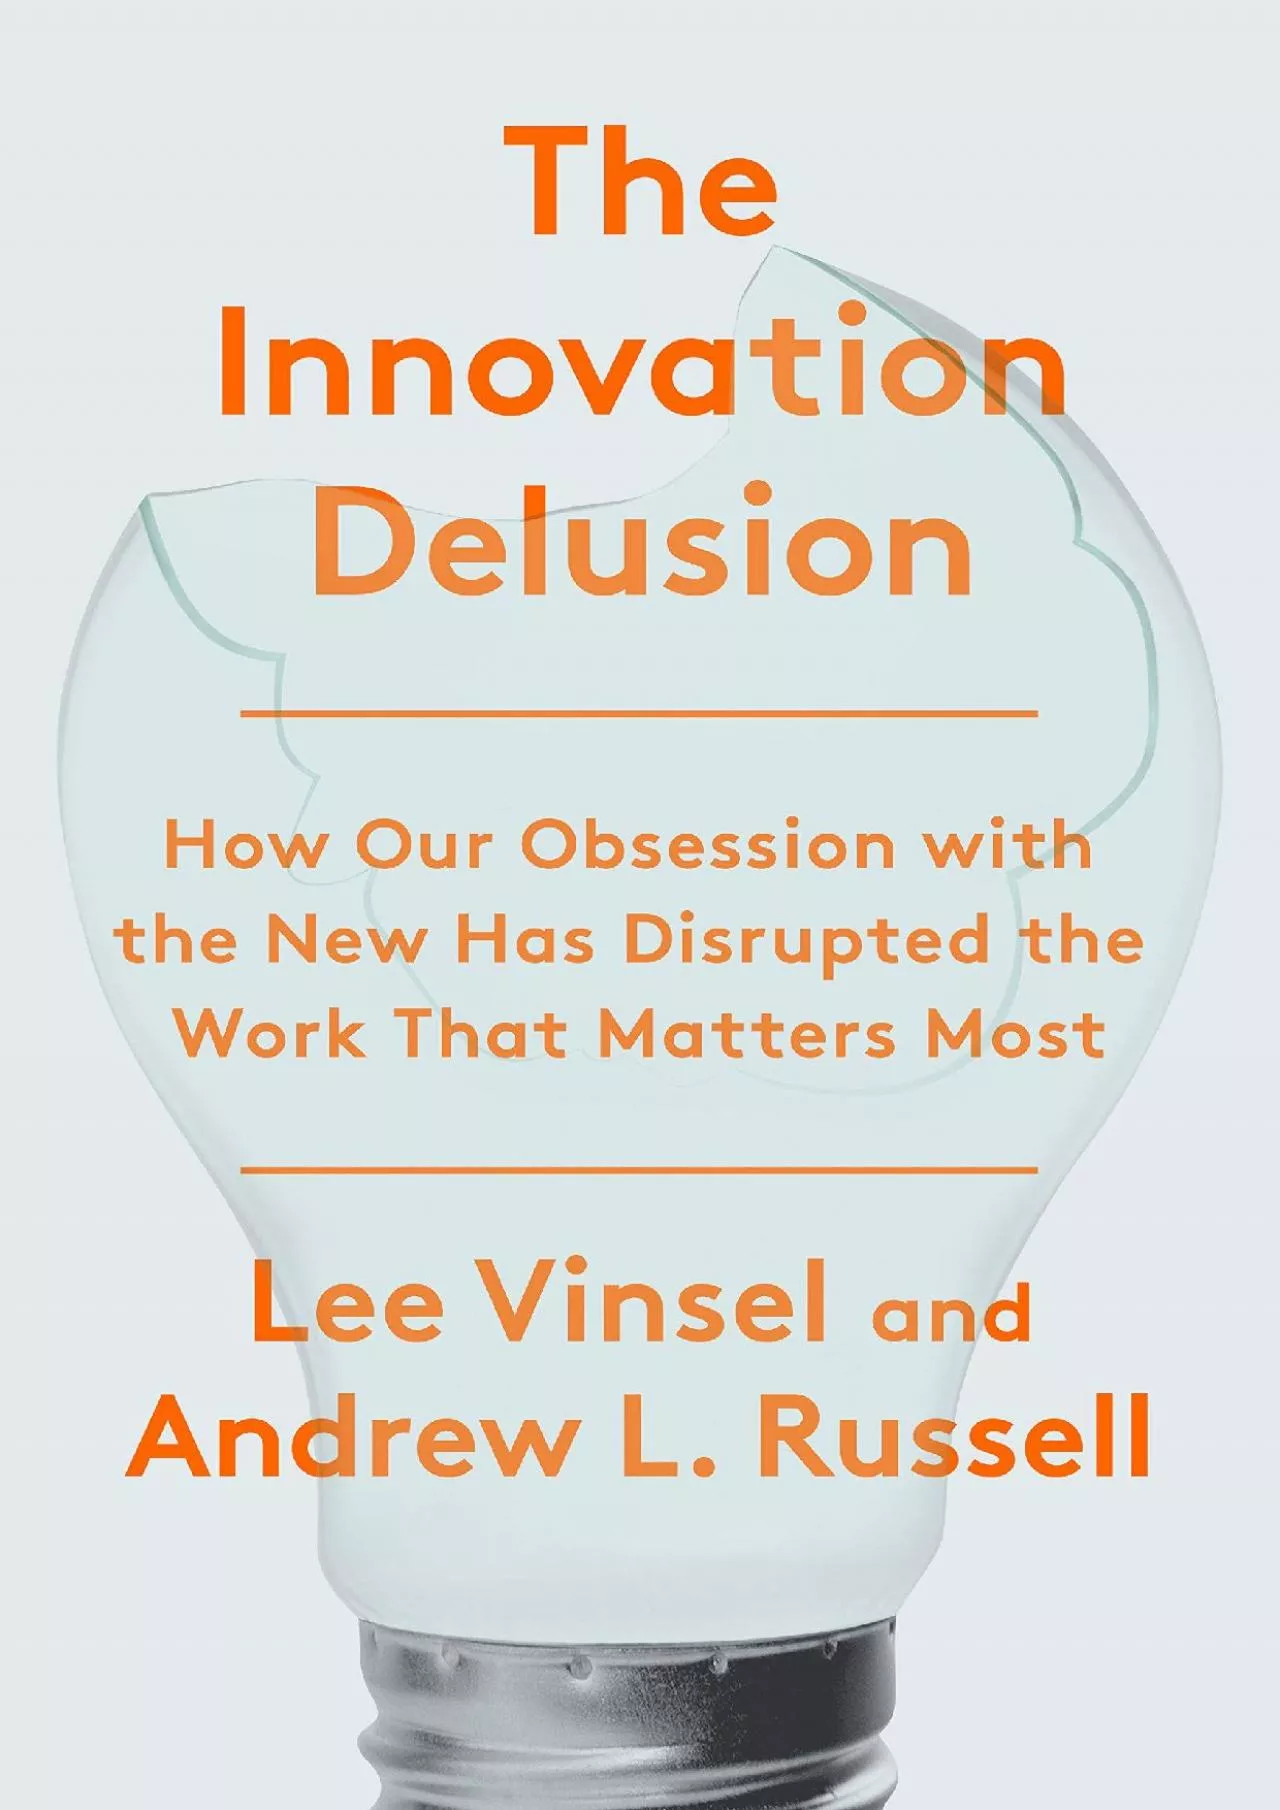 [EBOOK]-The Innovation Delusion: How Our Obsession with the New Has Disrupted the Work